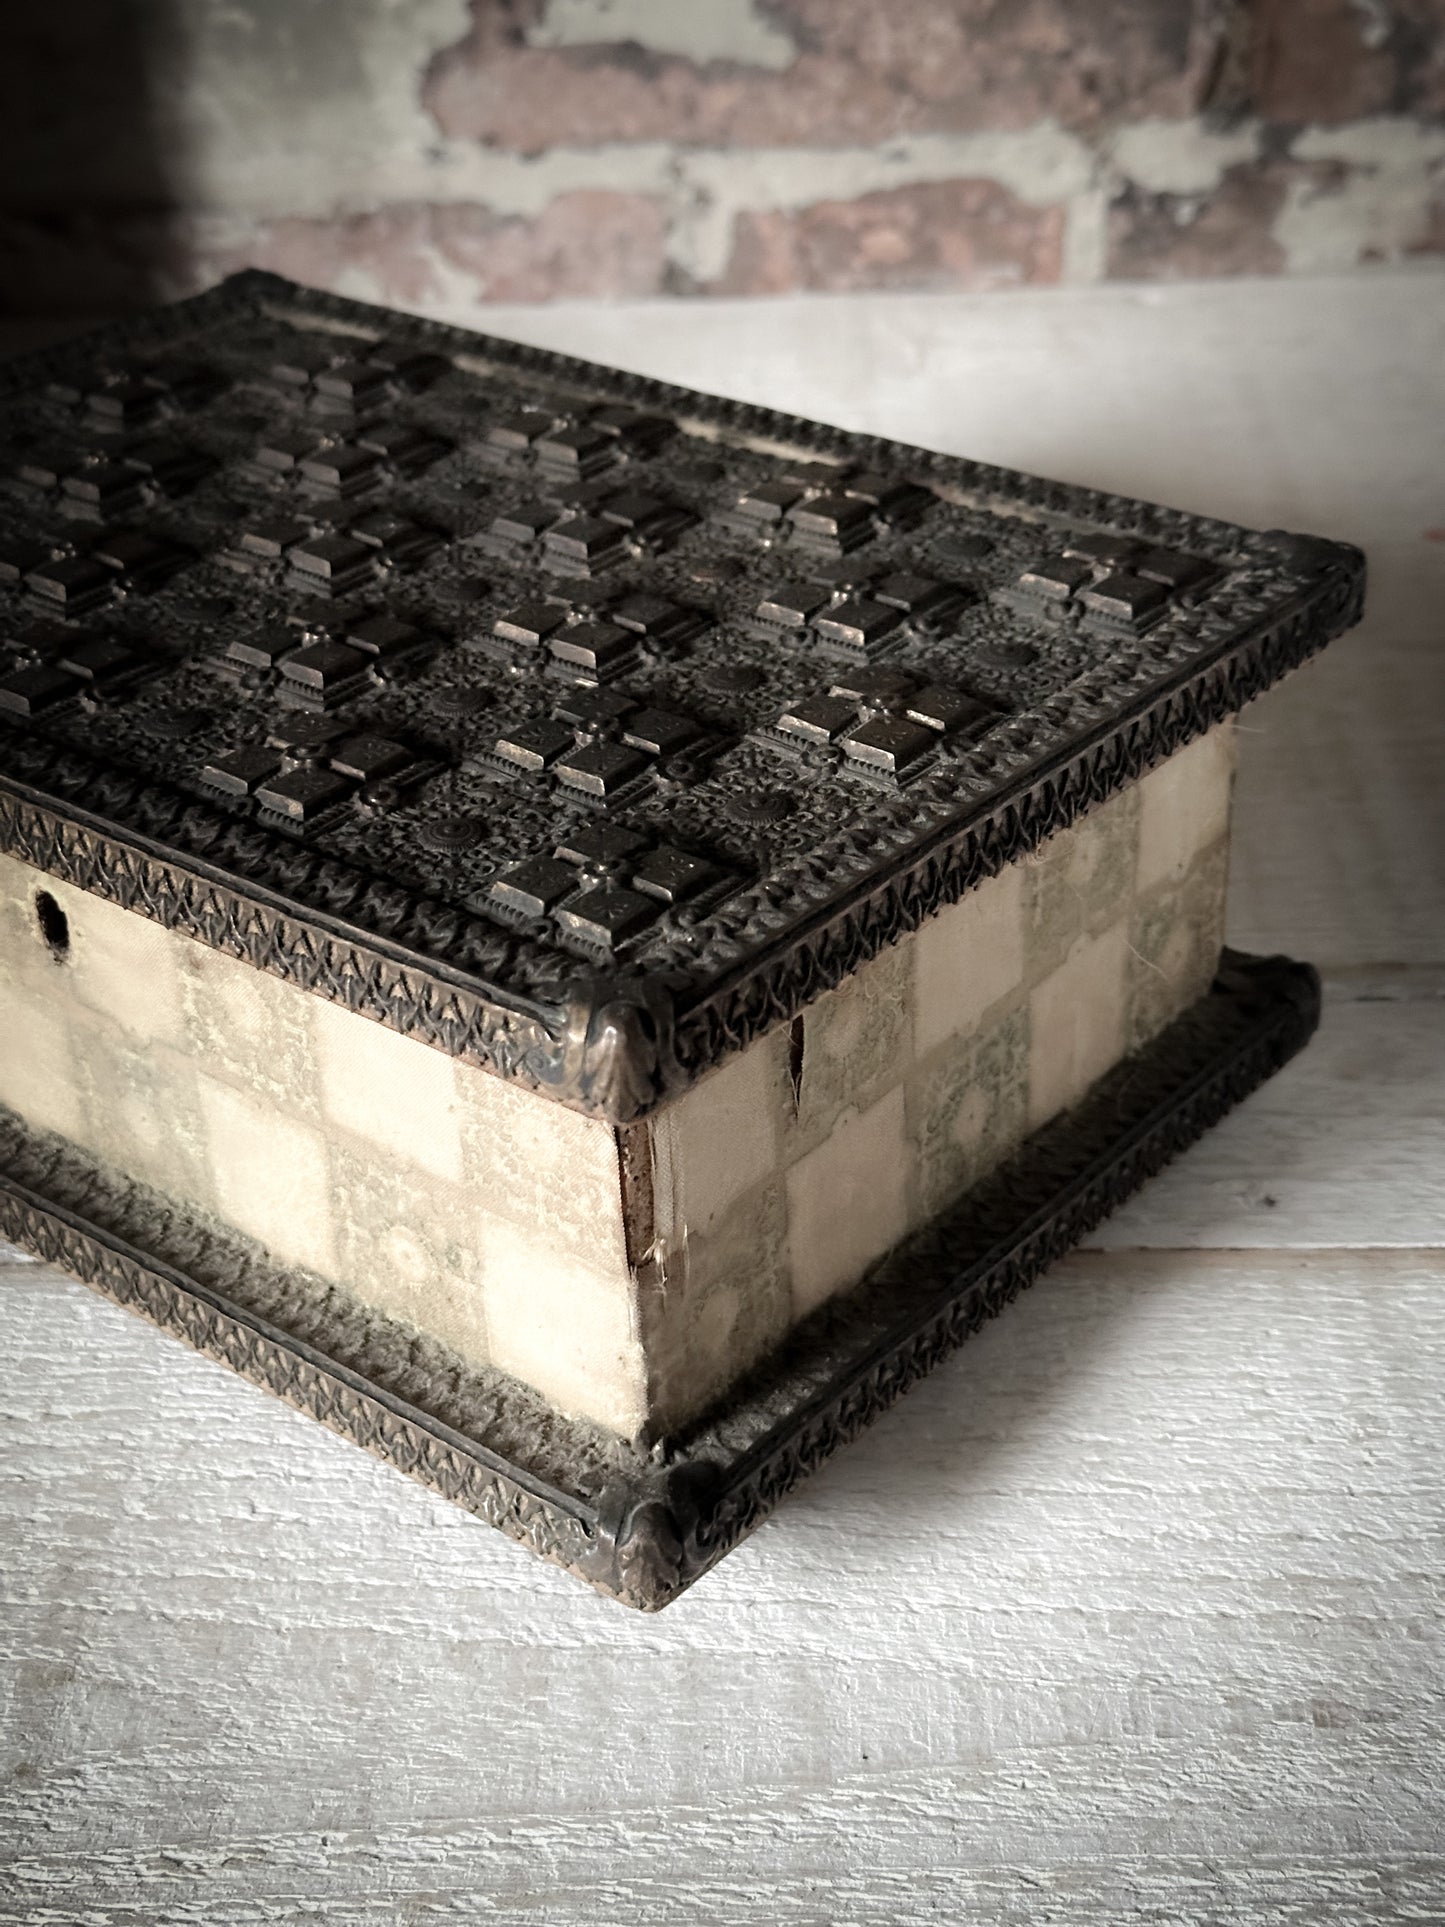 A curious, magical mystery box with medieval beaten metal lid and velvet trim